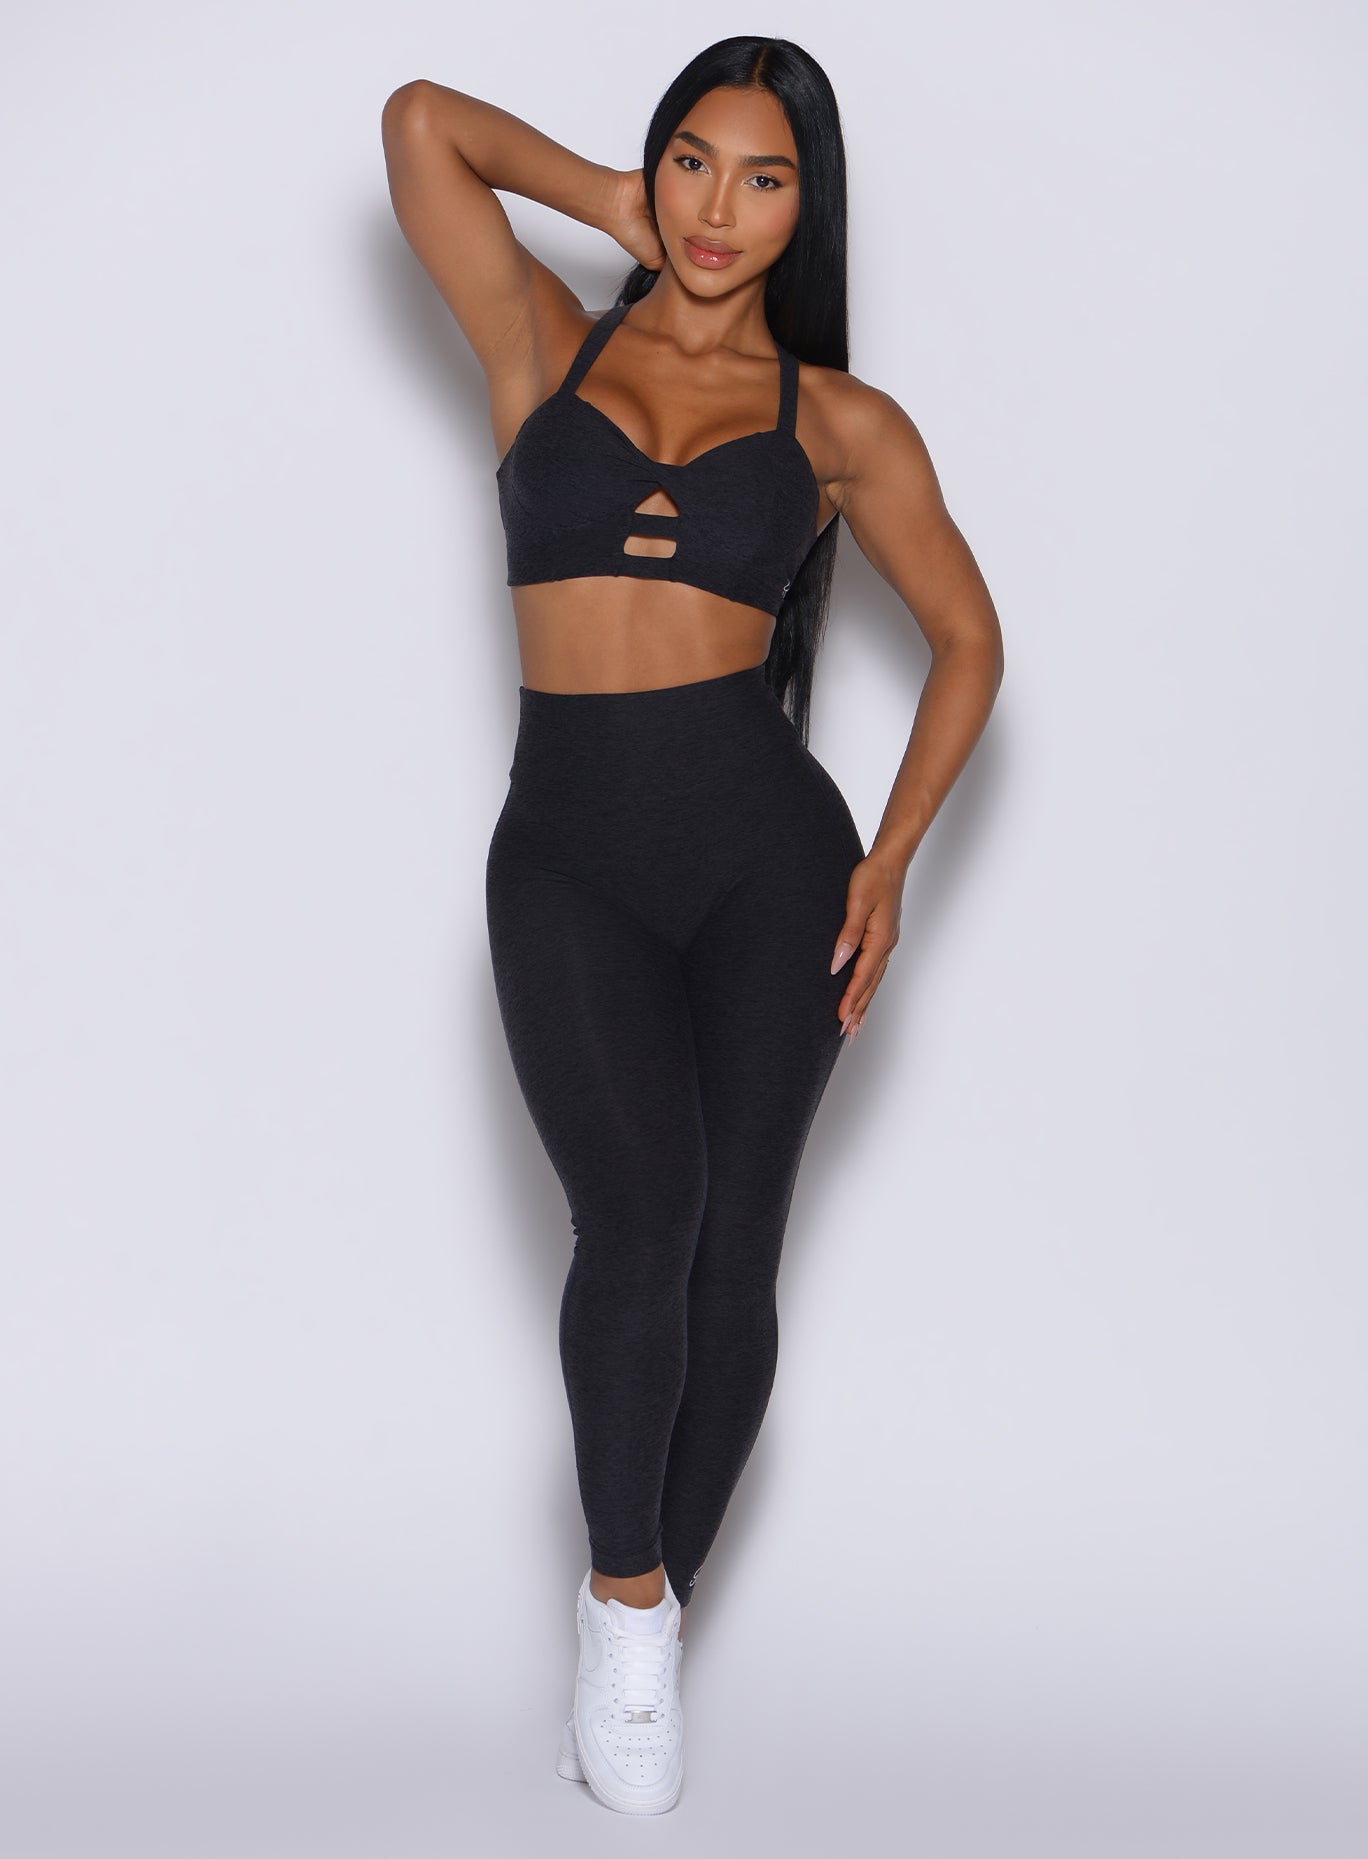 Model facing forward wearing our Movement Leggings in black Onyx color and a matching sports bra